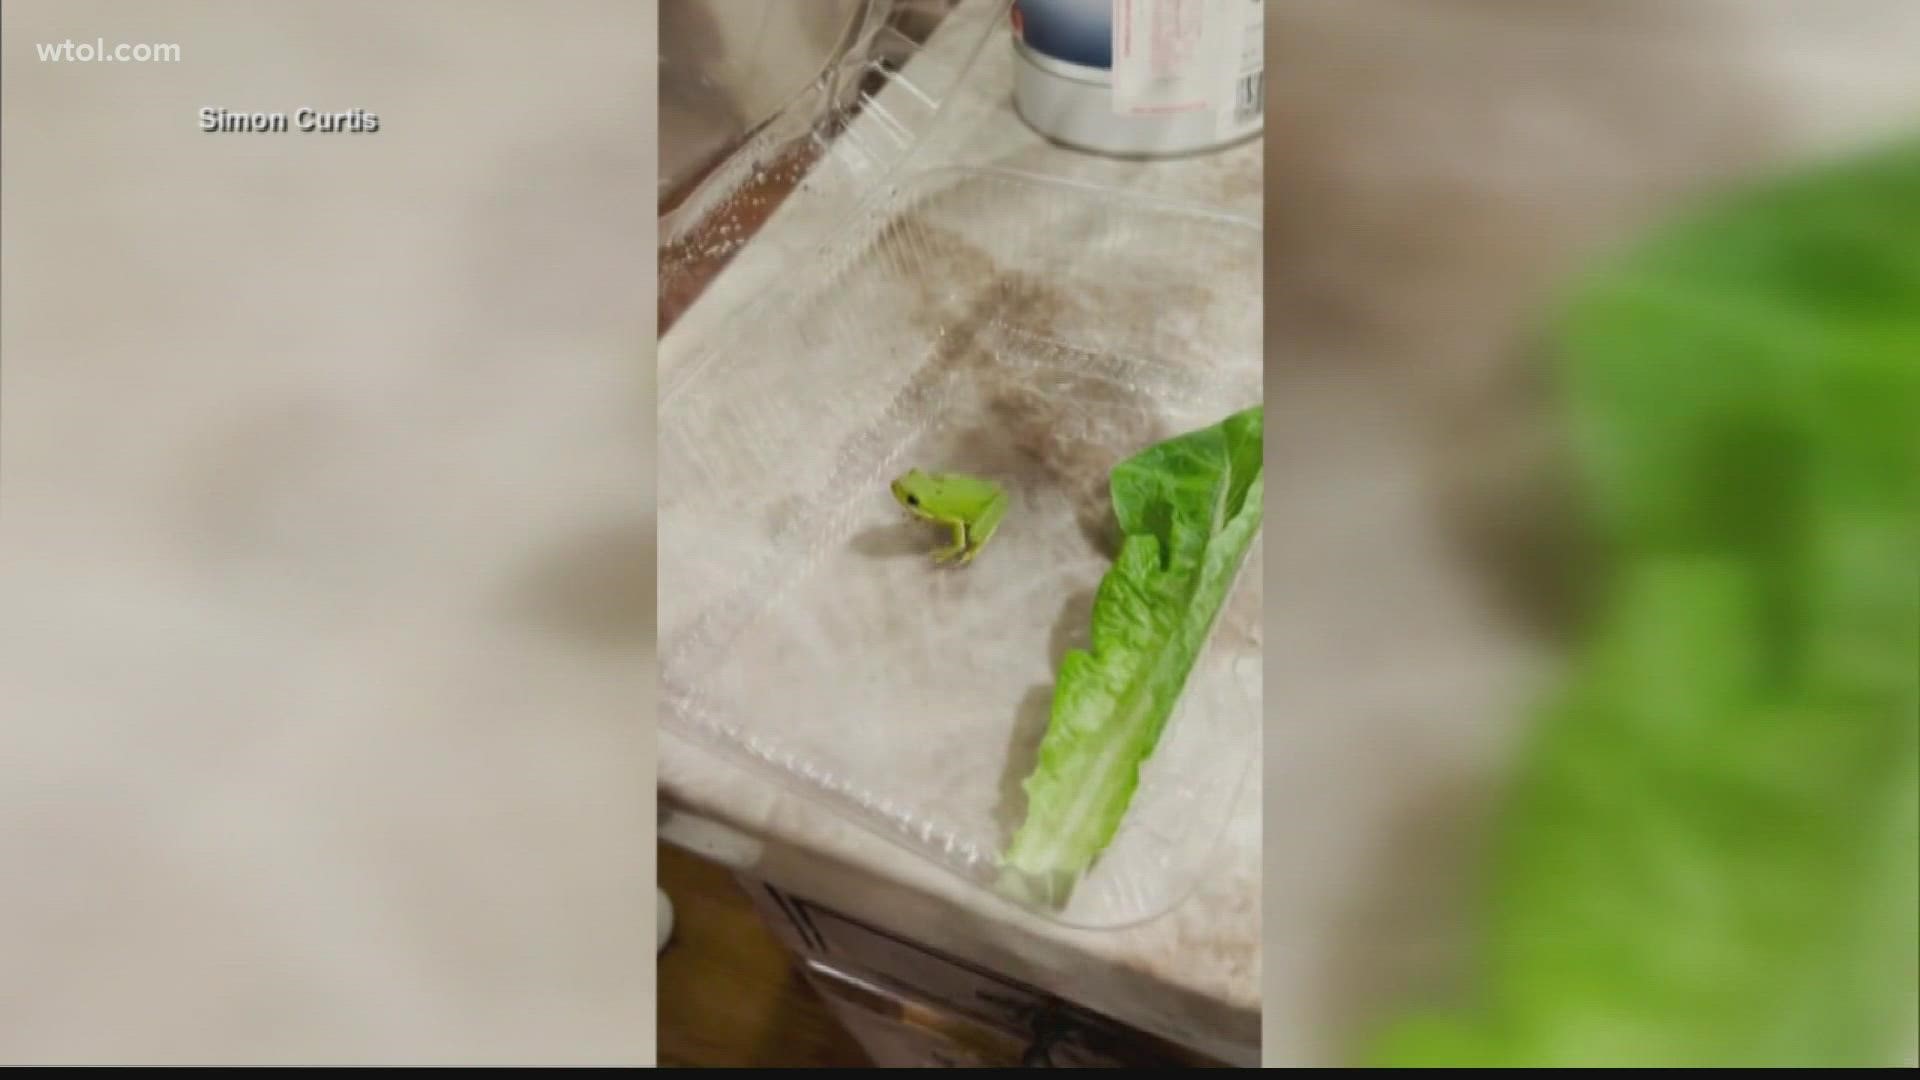 A leukemia survivor finds a frog in a box of romaine lettuce. A cool moment for him, as he had a toy frog when he was in the hospital for leukemia.